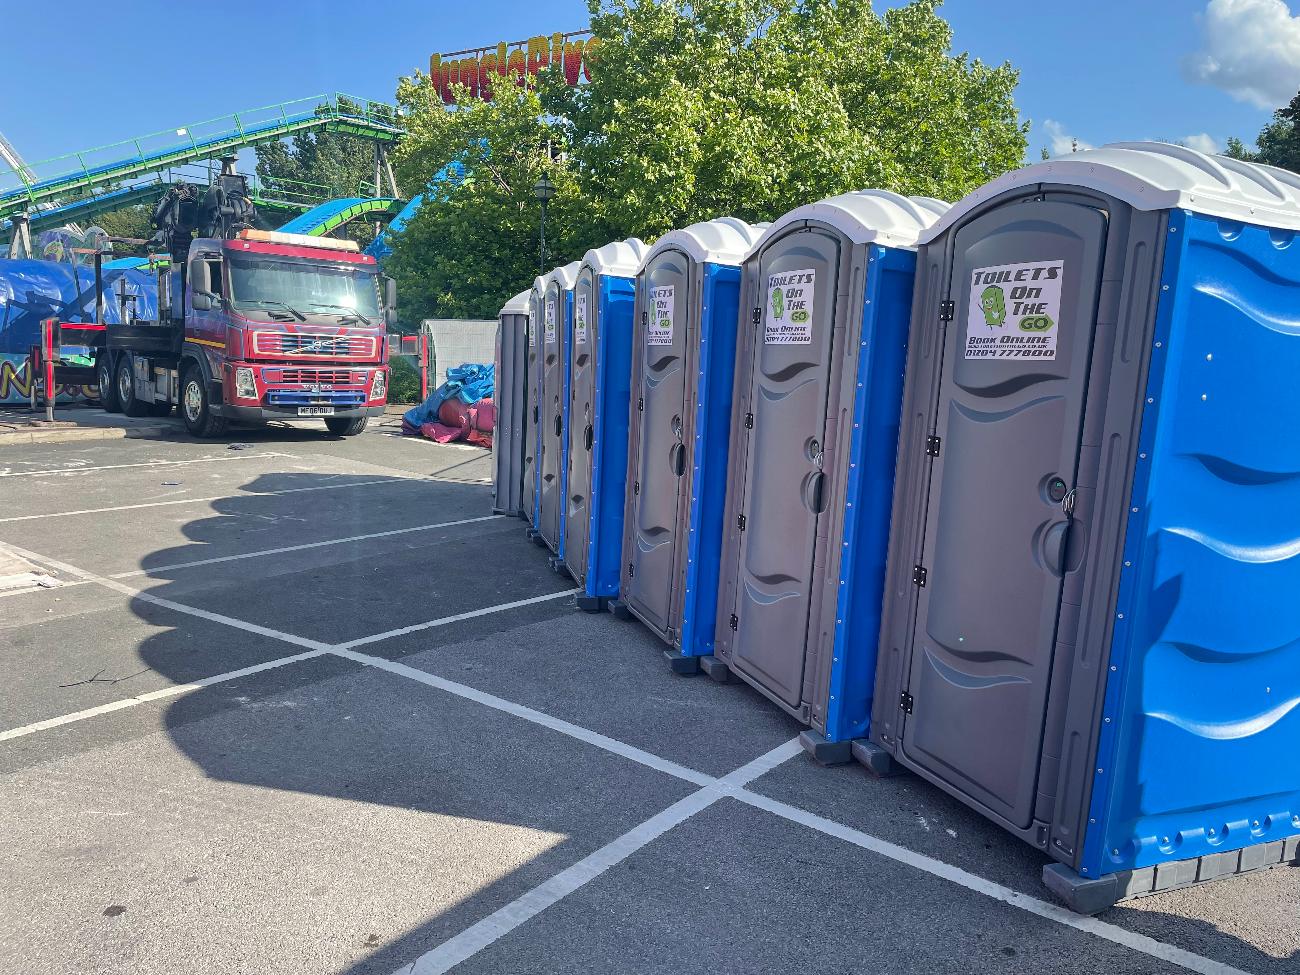 Gallery | Portable Toilet Loo Hire Rental Company in North West uk and Manchester gallery image 20